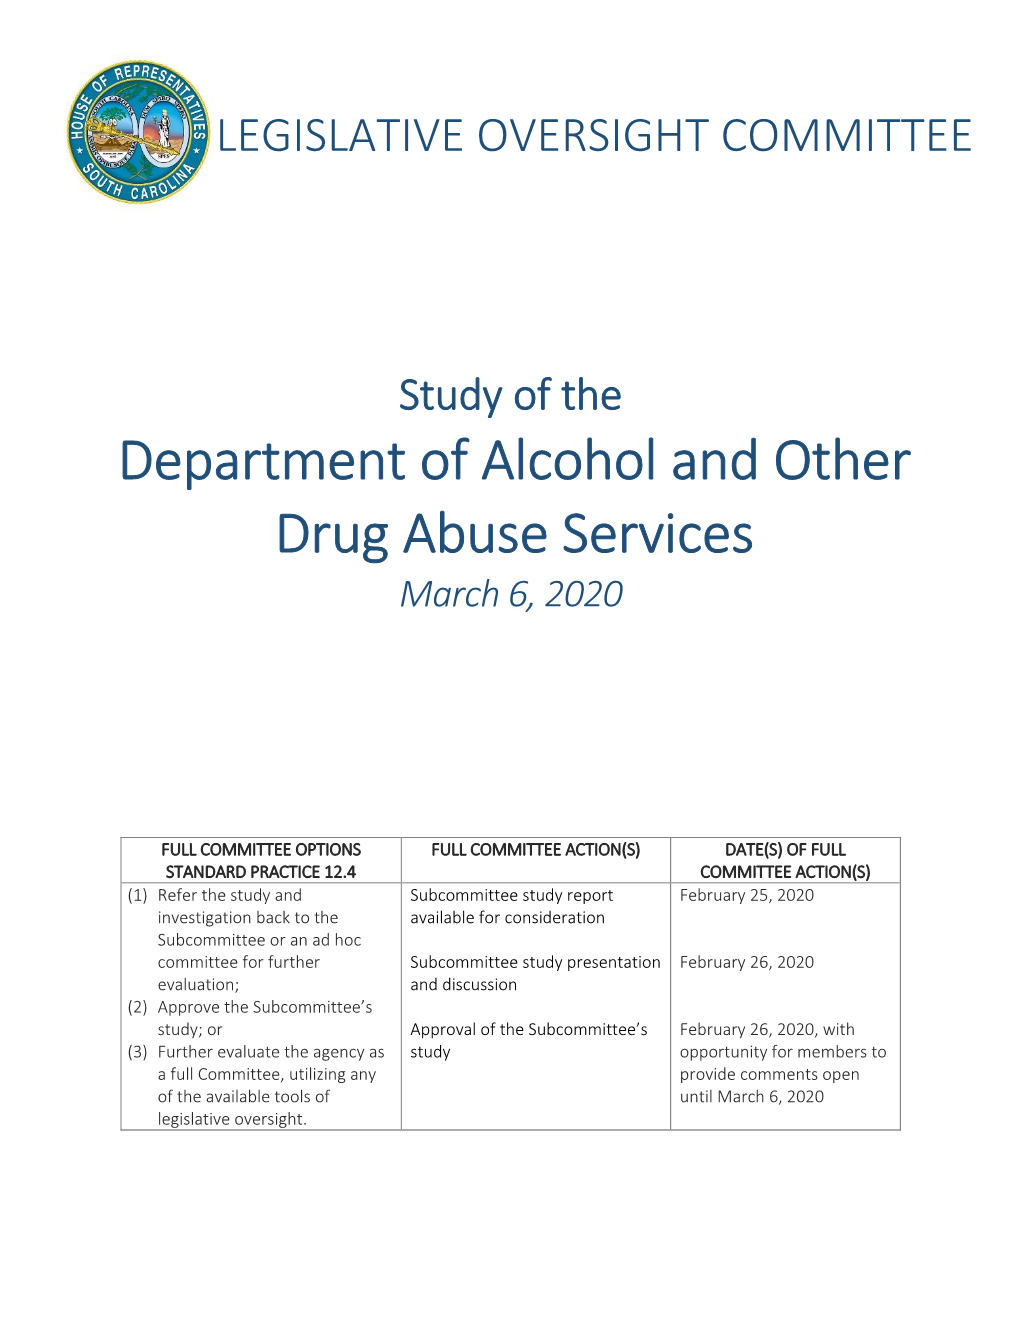 Department of Alcohol and Other Drug Abuse Services March 6, 2020